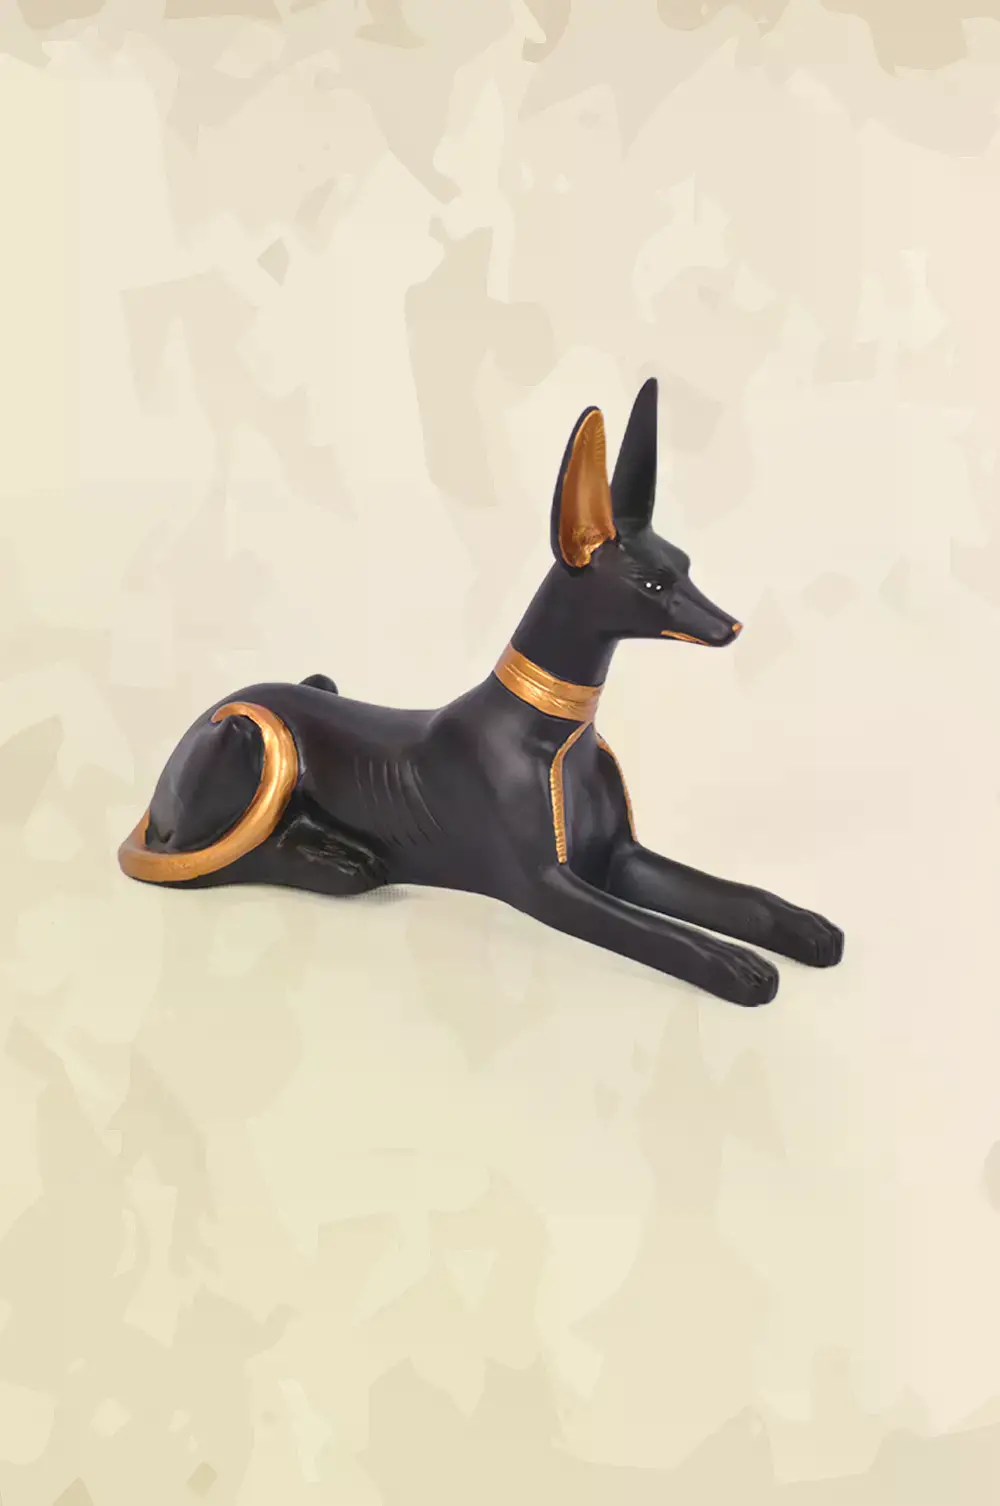 Anubis lying down statue in black